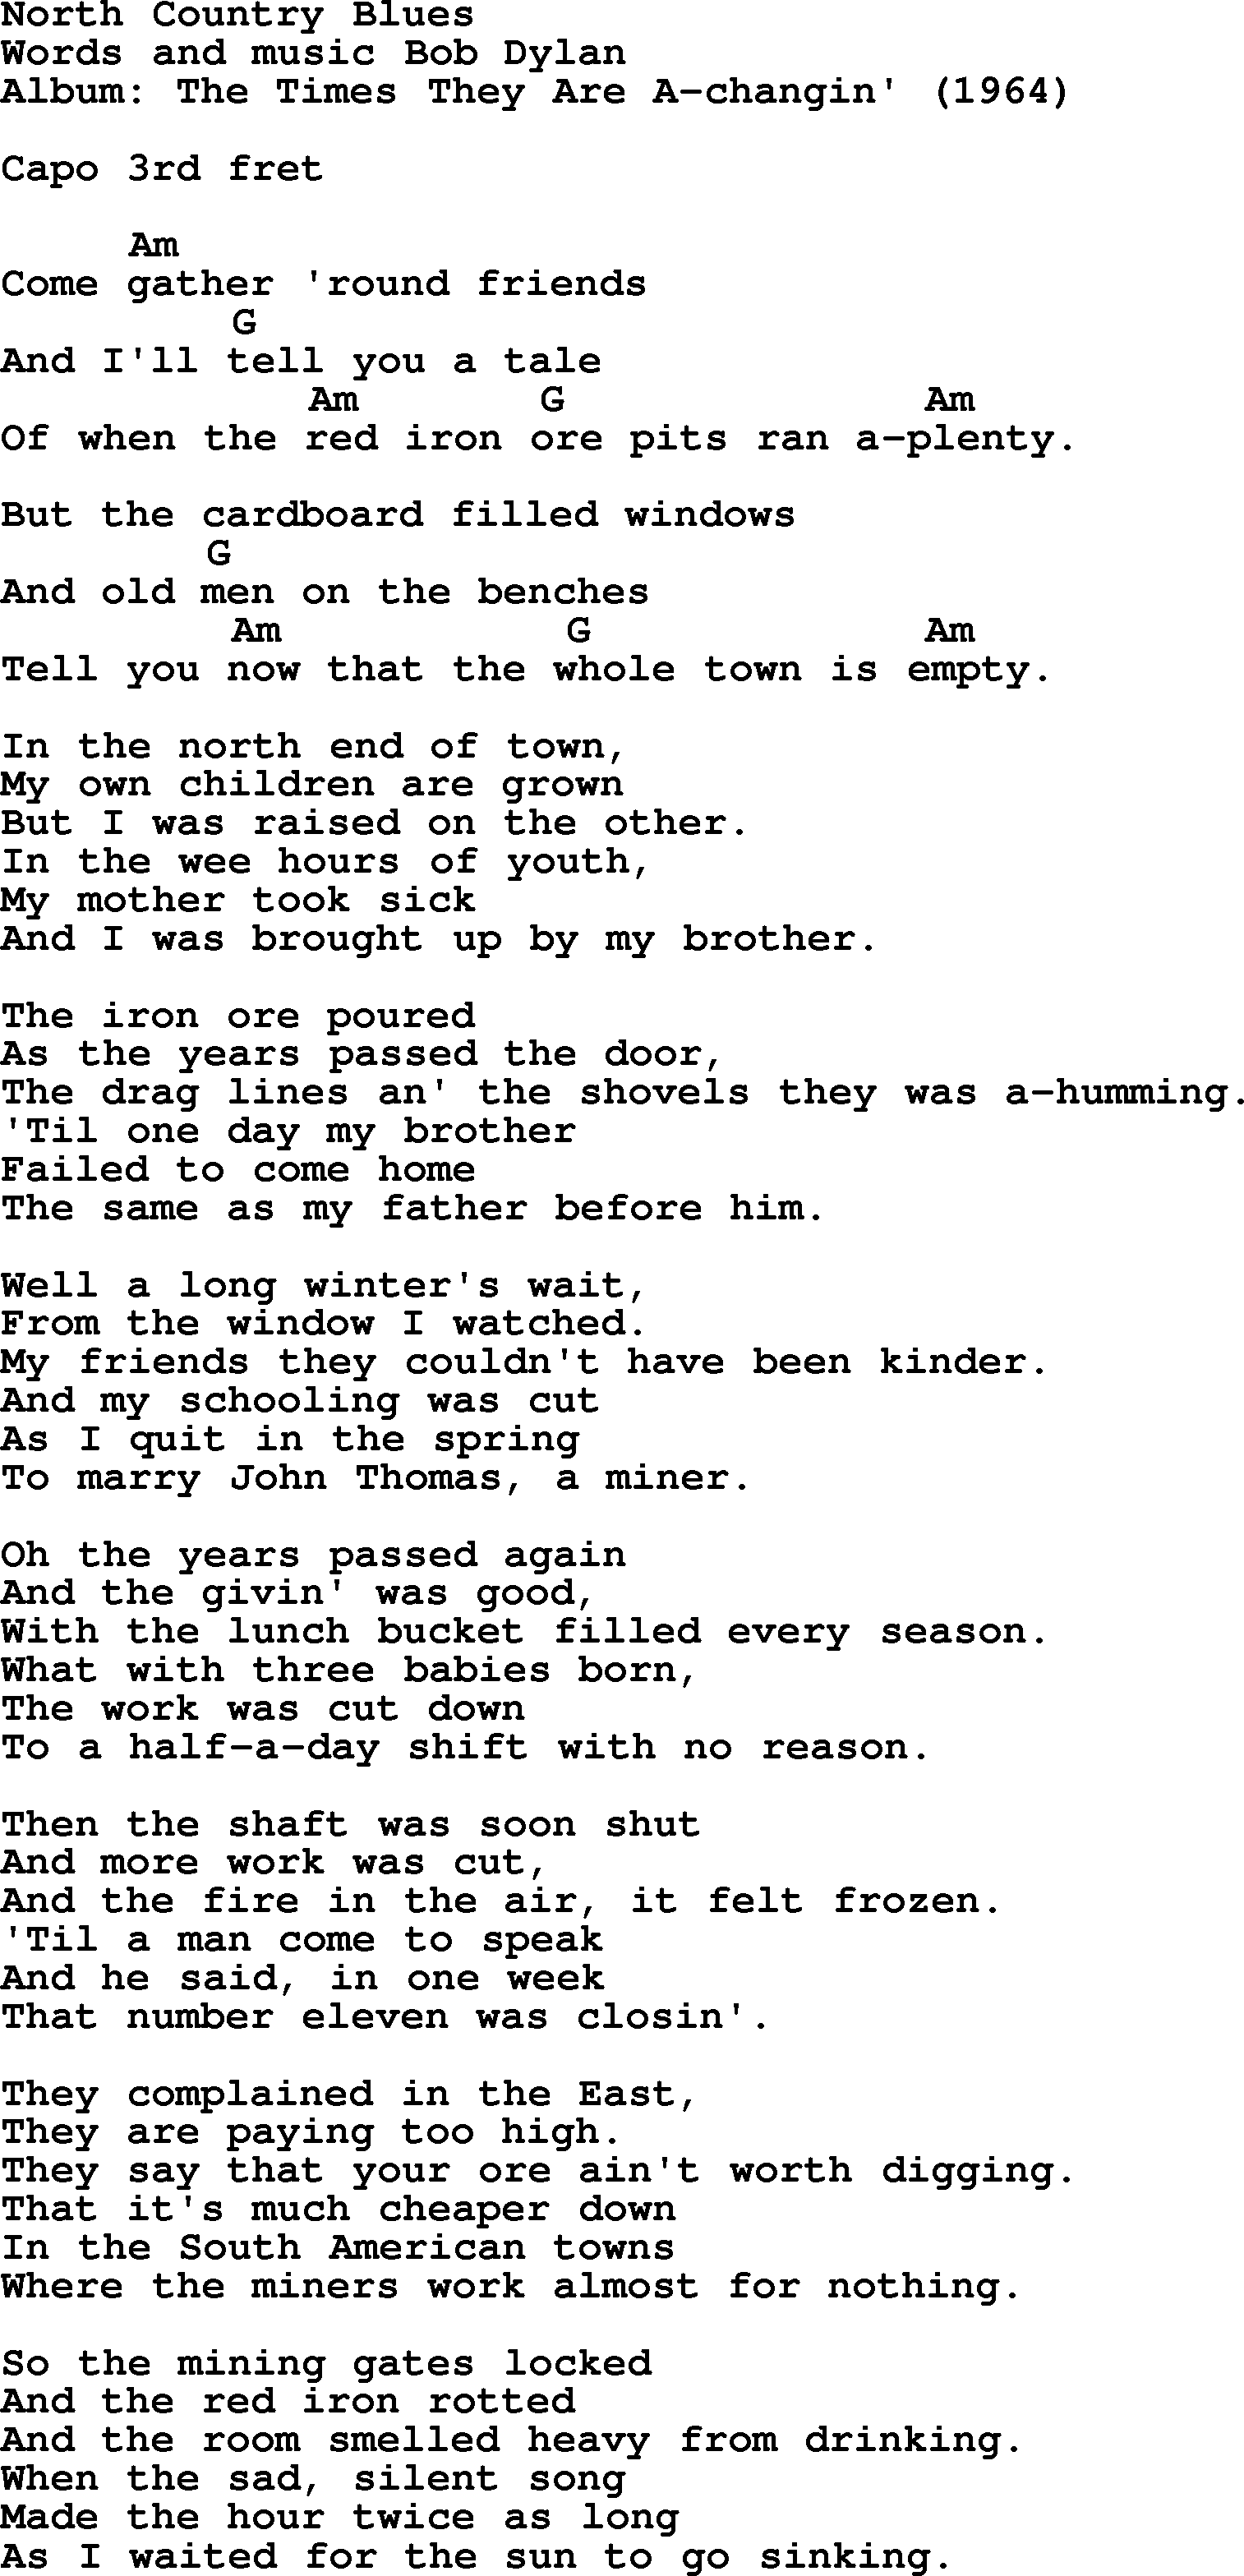 Bob Dylan song, lyrics with chords - North Country Blues